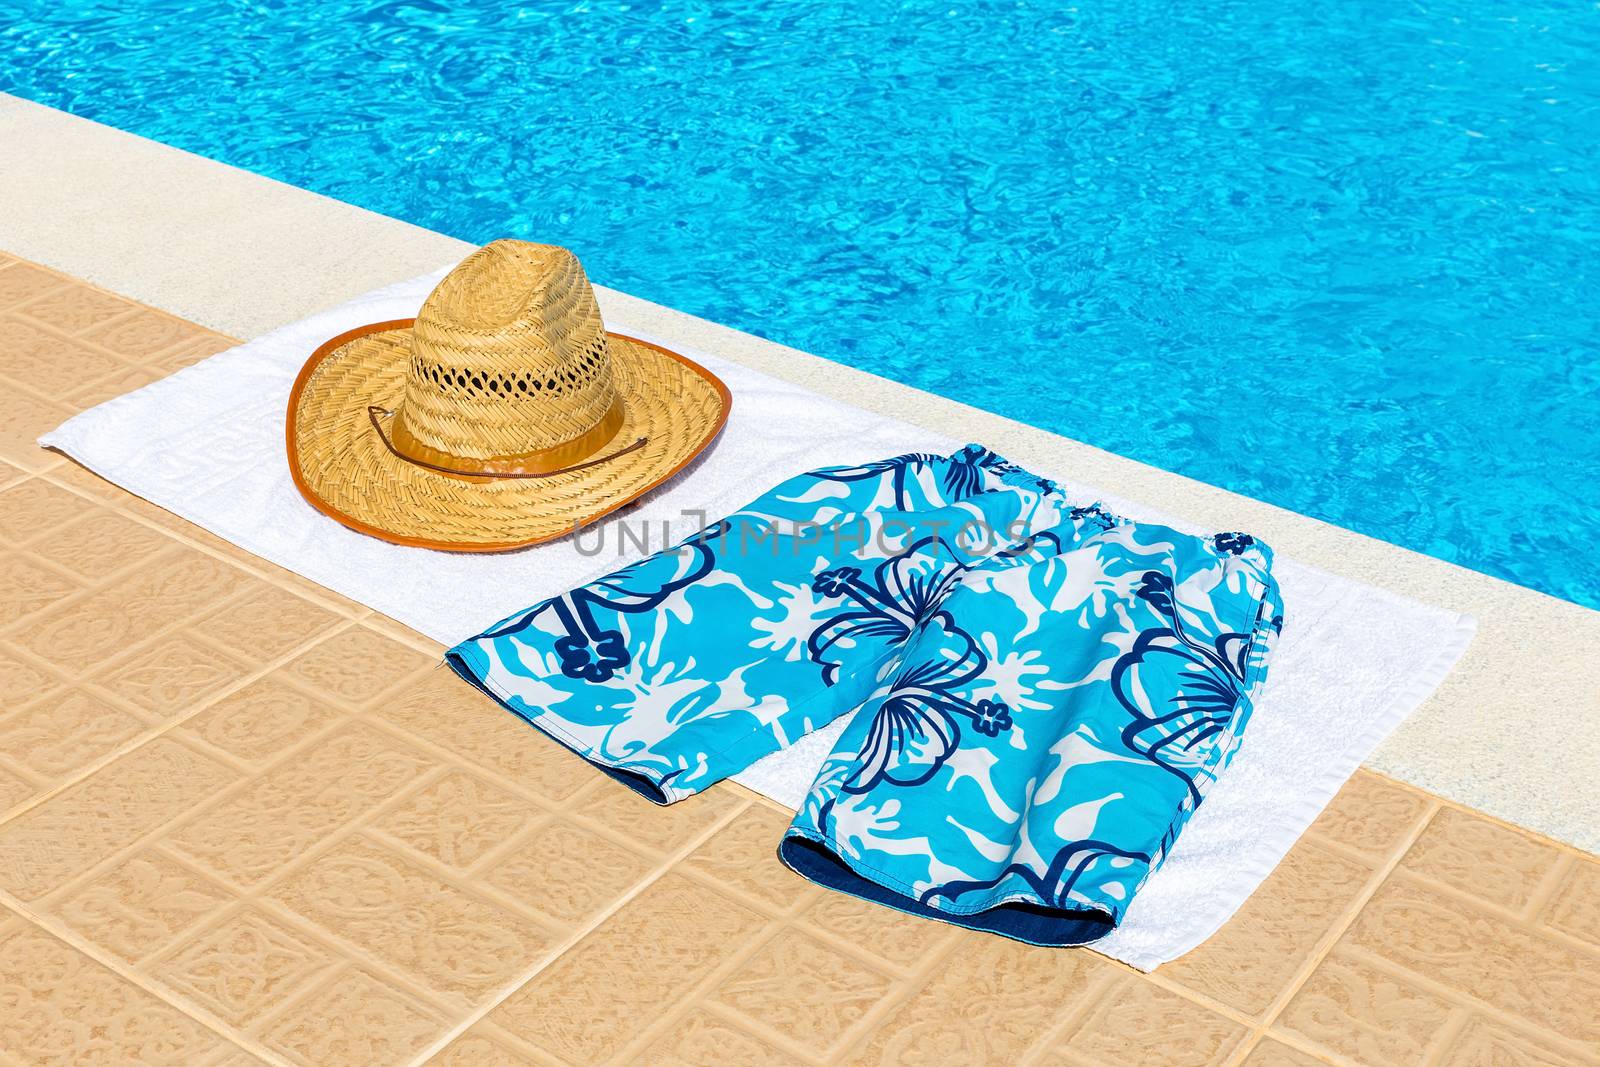 reed hat and swimming trunks on towel near blue fswimming pool